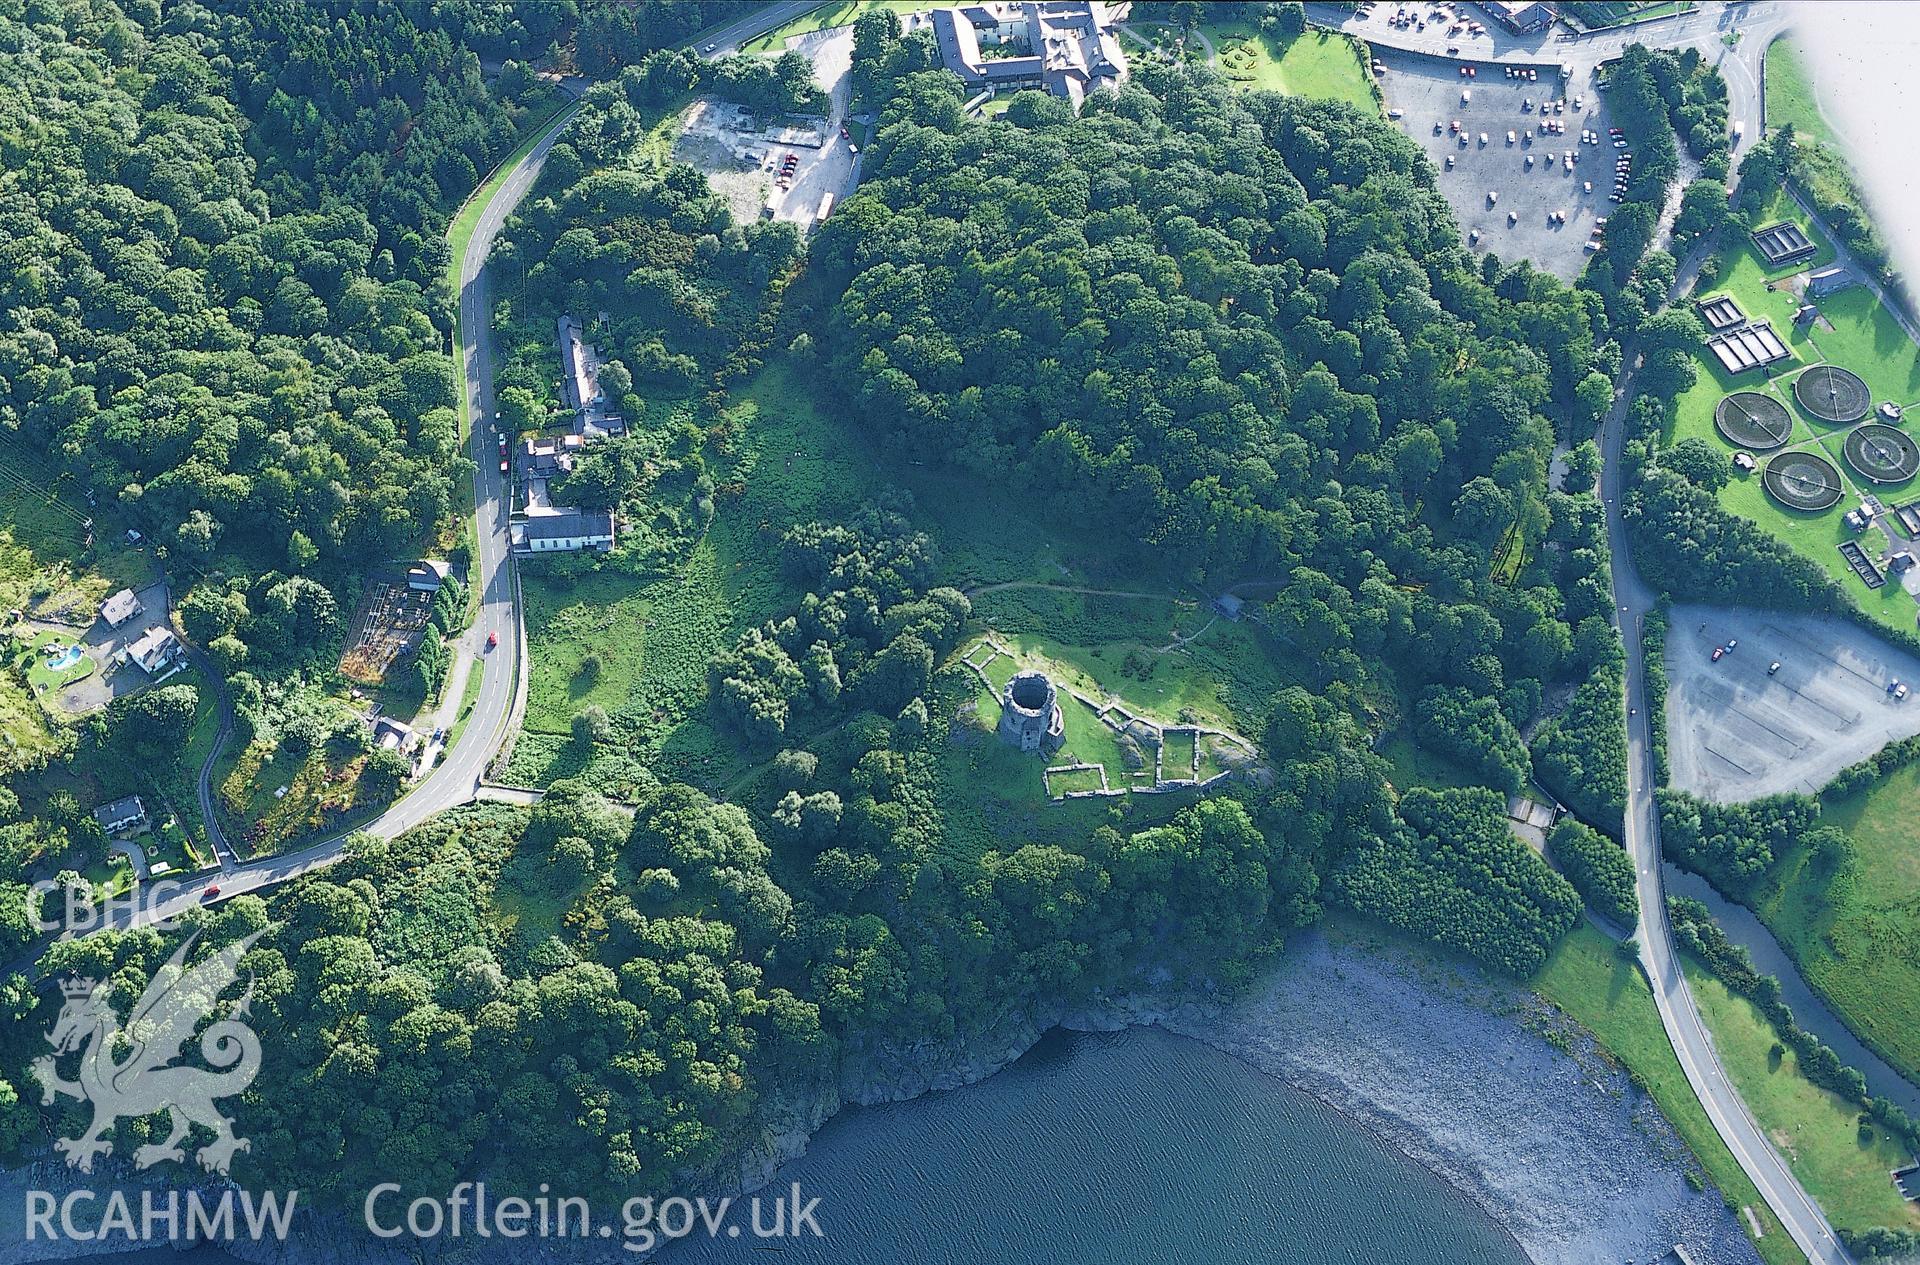 RCAHMW colour slide oblique aerial photograph of Dolbadarn Castle, Llanberis, taken on 20/08/1999 by Toby Driver